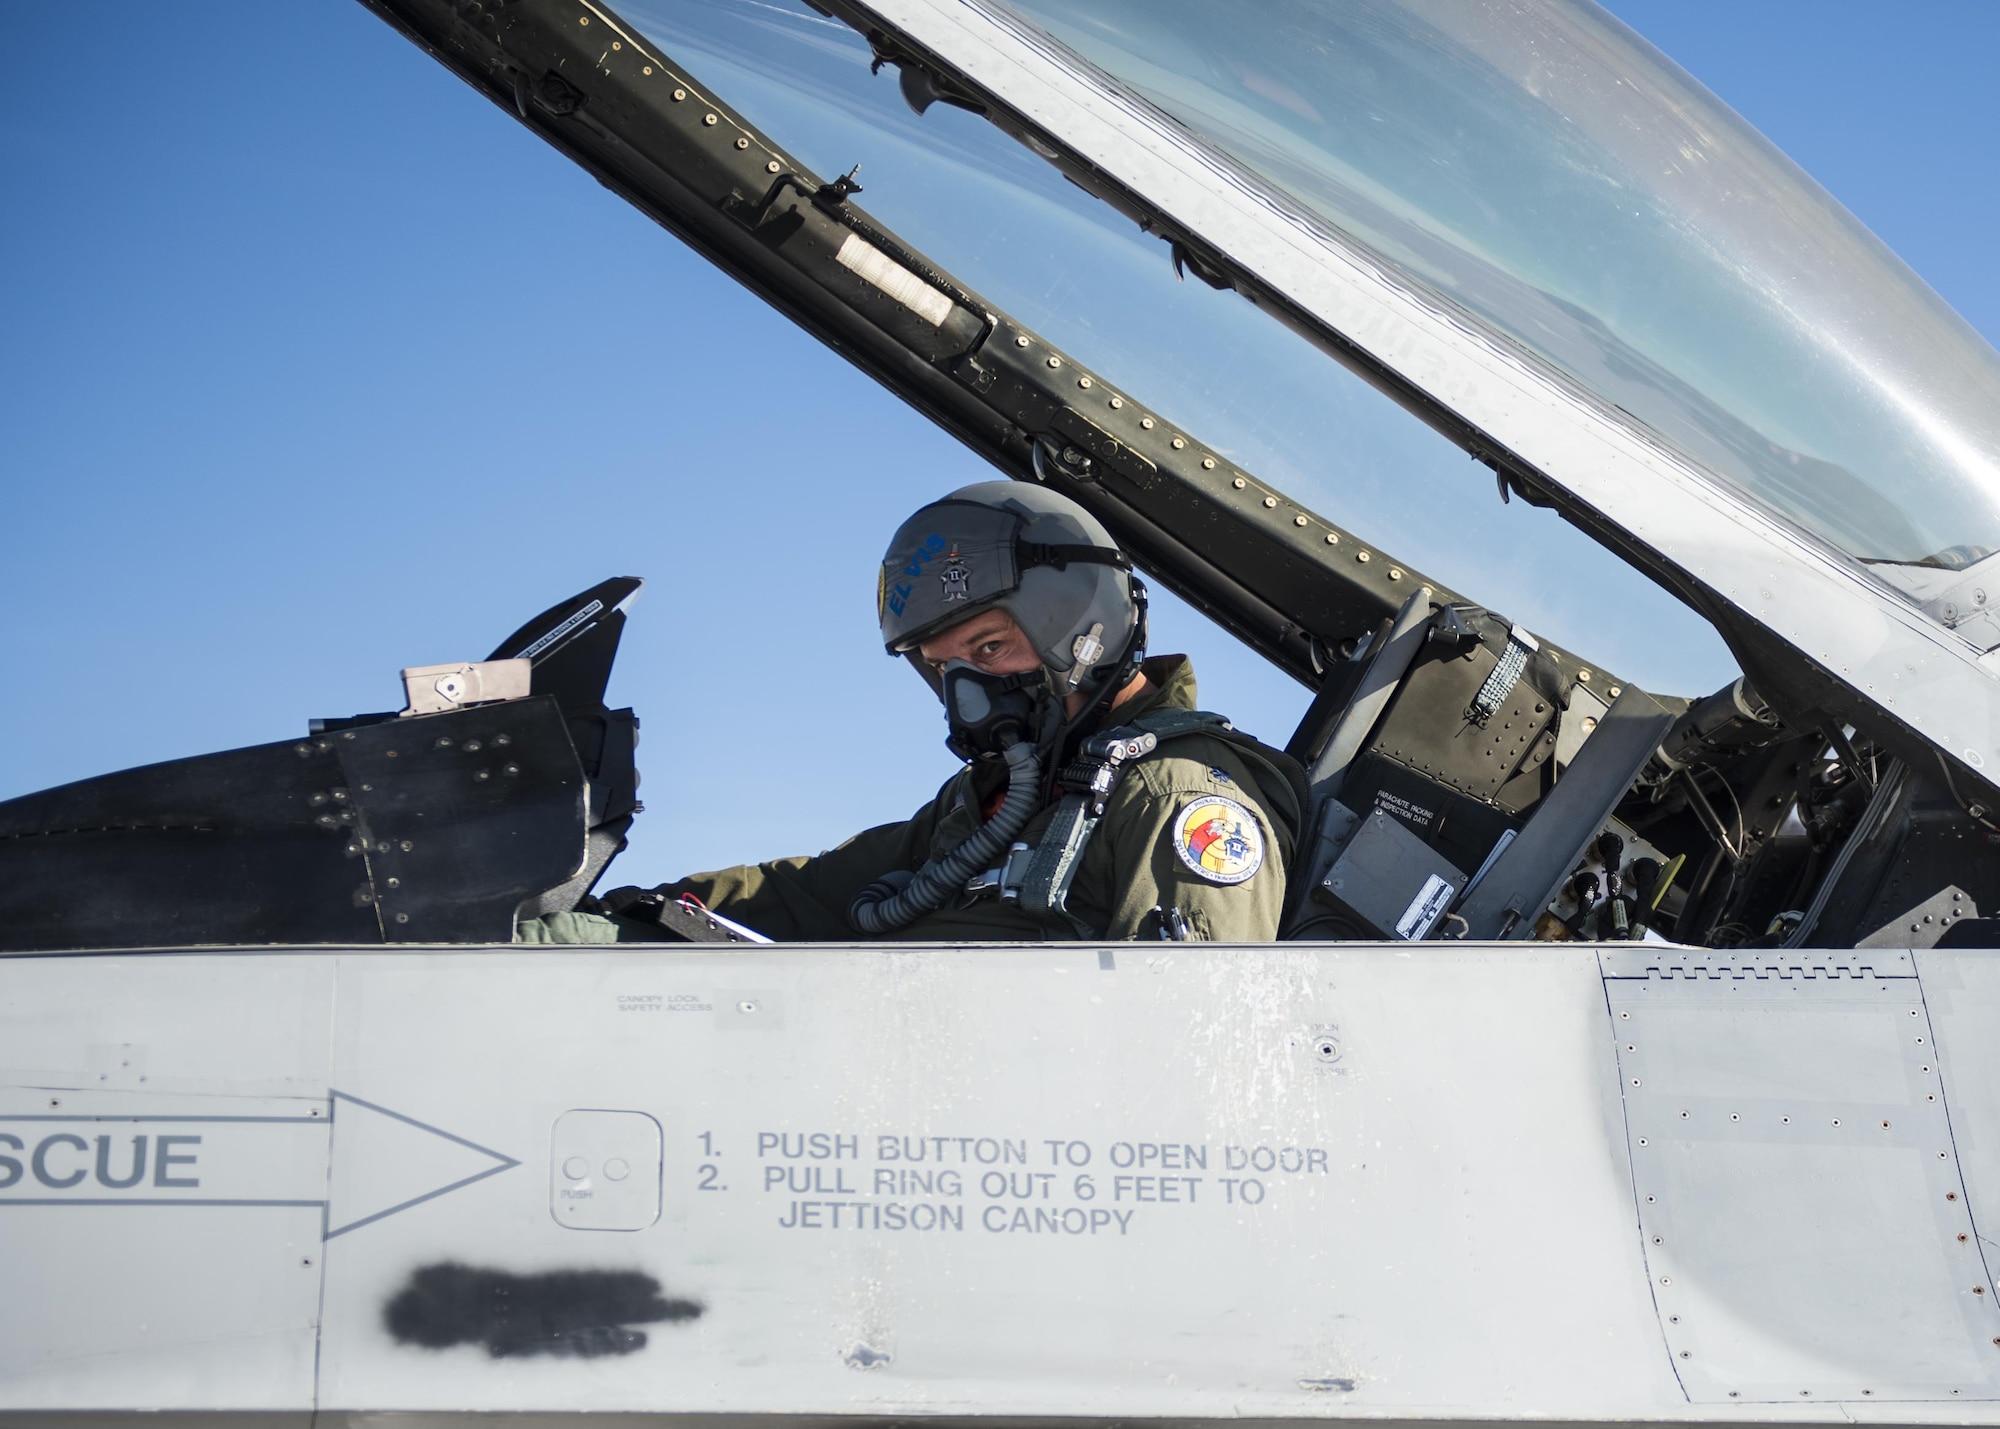 Lt. Col. Ronald King, the 82nd Aerial Targets Squadron, Det. 1 commander, prepares for the first QF-16 drone flight at Holloman Air Force Base, N.M., on Feb. 10, 2017. The QF-16 has been flying at Tyndall Air Force Base, Florida since late 2012. This was the first flight at Holloman since the QF-4 Phantom officially retired in 2016 and the detachment transitioned to flying QF-16s. (U.S. Air Force photo by Senior Airman Emily Kenney)